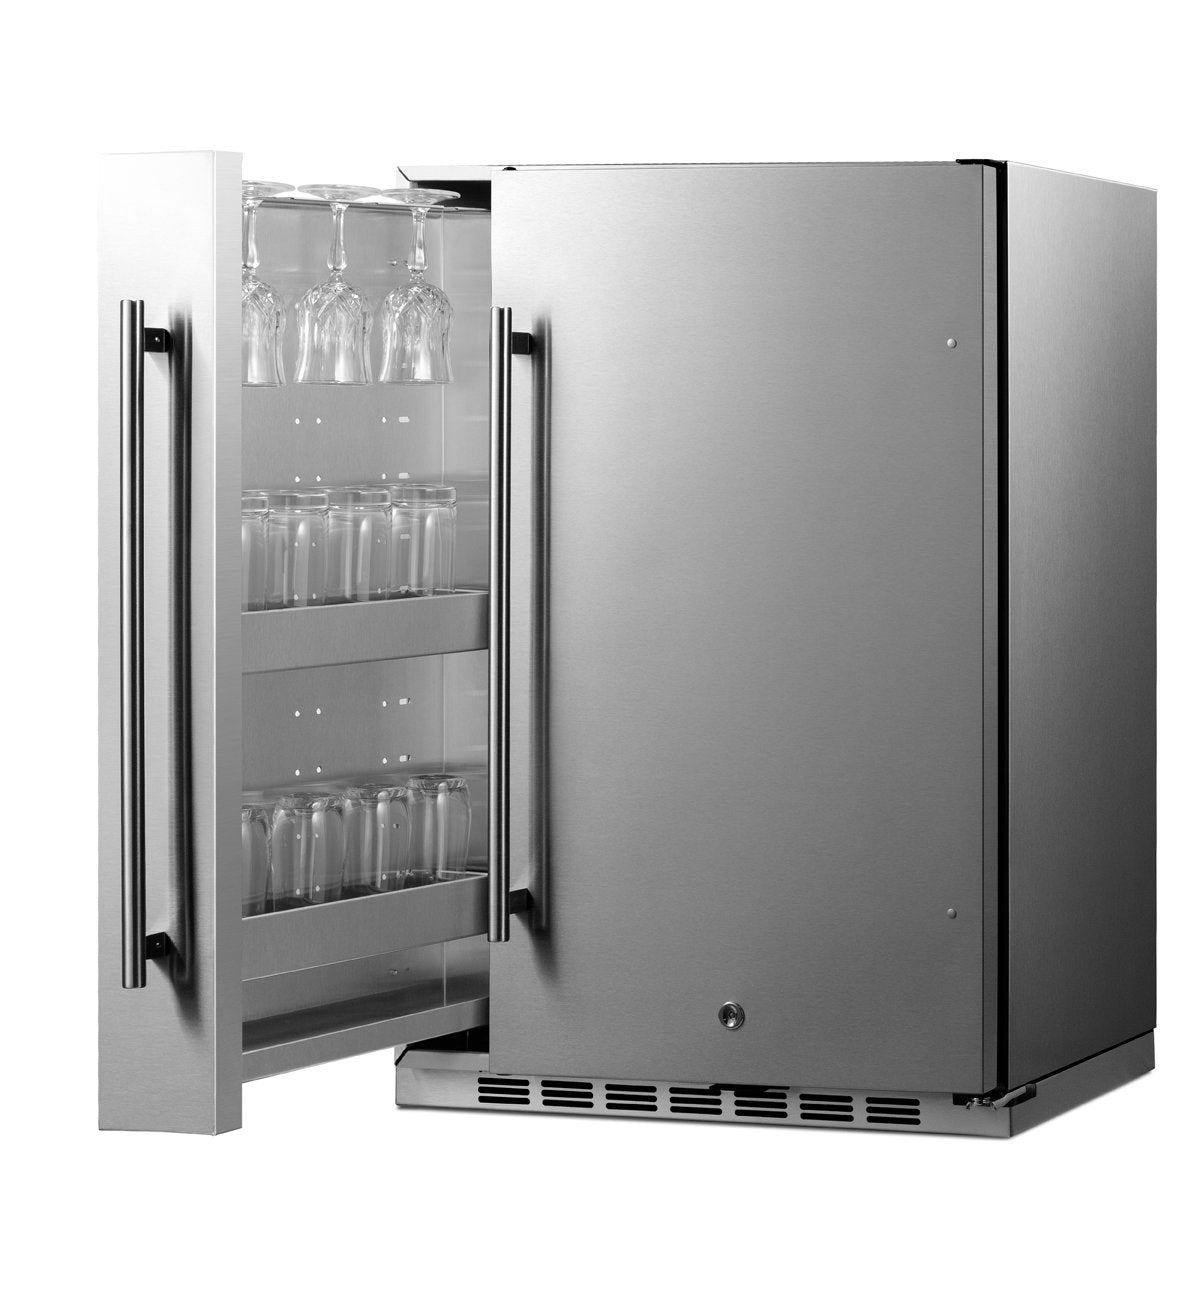 SUMMIT Shallow Depth 24" Wide Built-In All-Refrigerator With Slide-Out Storage Compartment